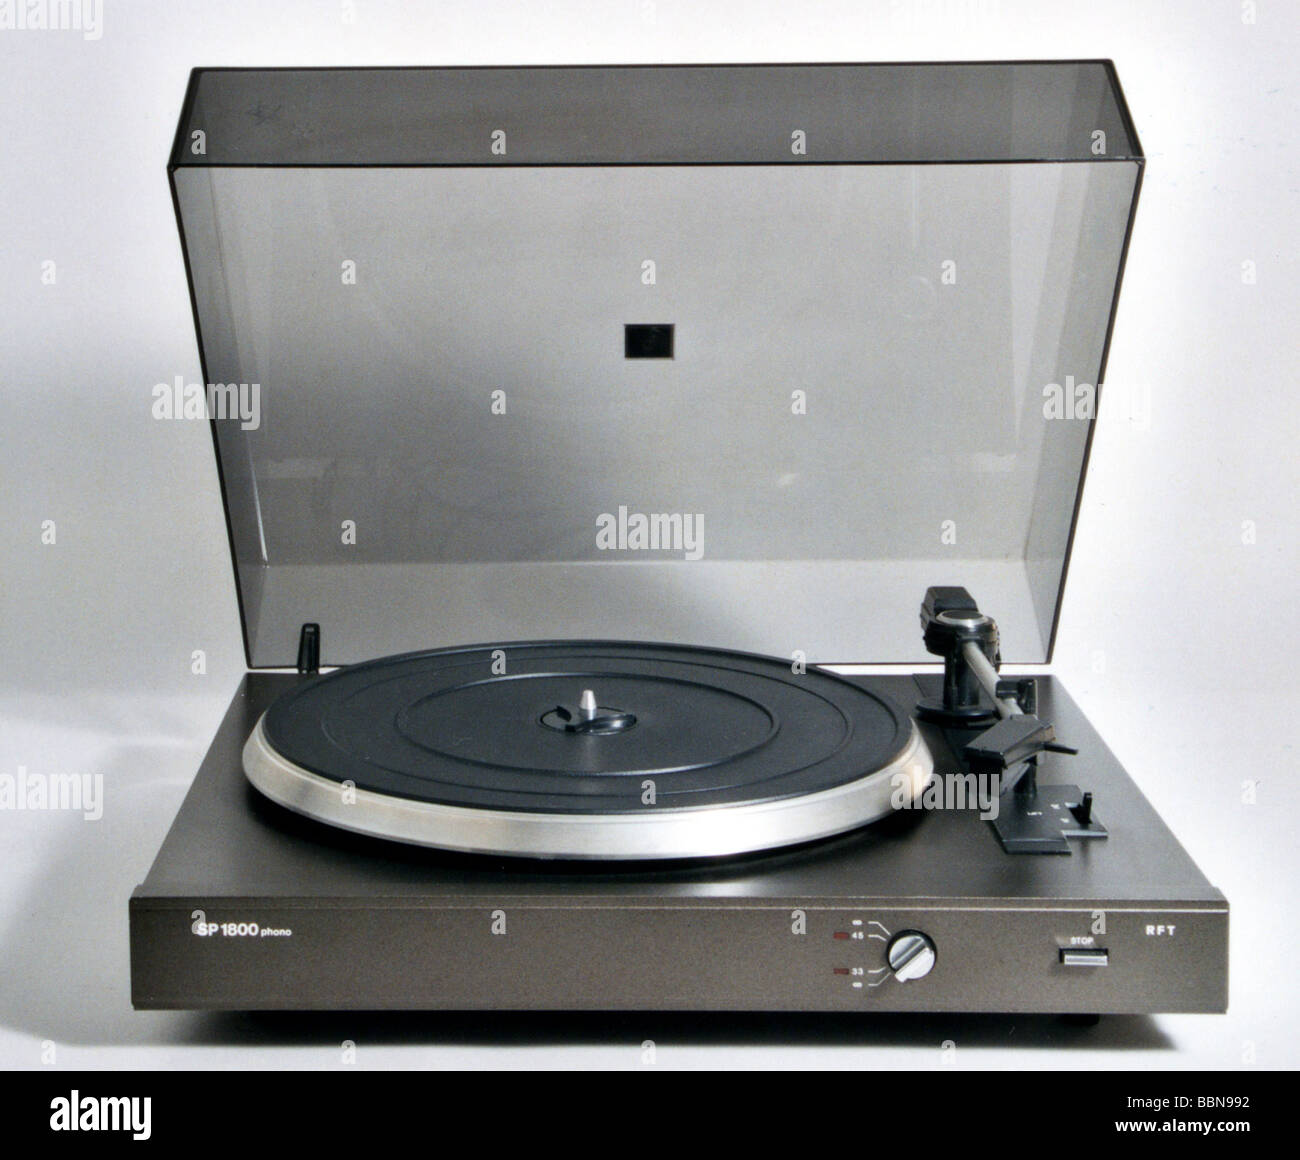 Technics, full automatic stereo record player SP 1800, made by VEB Phonotechnik Zittau-Pirna, GDR, 1985, Historic, Historical, 20th Century, East-Germany, East Germany, DDR, sound, audio technic, home electronics, Factory design, 1980s, 80s, Zittau, Pirna, Foto Stock